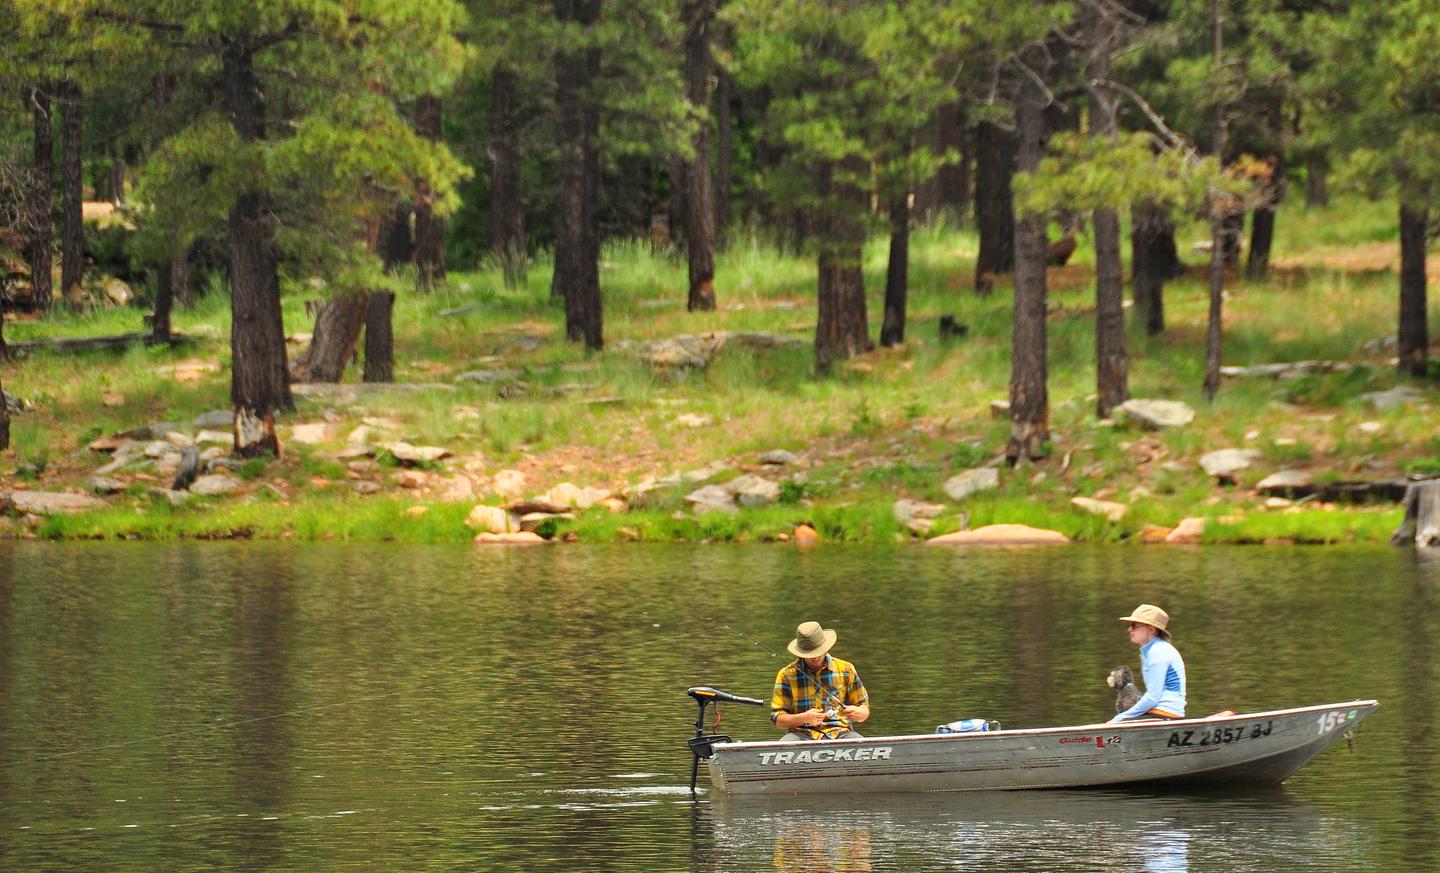 Fishermen in boat on Woods Canyon LakeWoods Canyon Lake is one of the most popular fishing lakes in Arizona. Built by Arizona Game and Fish in 1958, this lake is stocked weekly during the summer with catchable sized trout.  